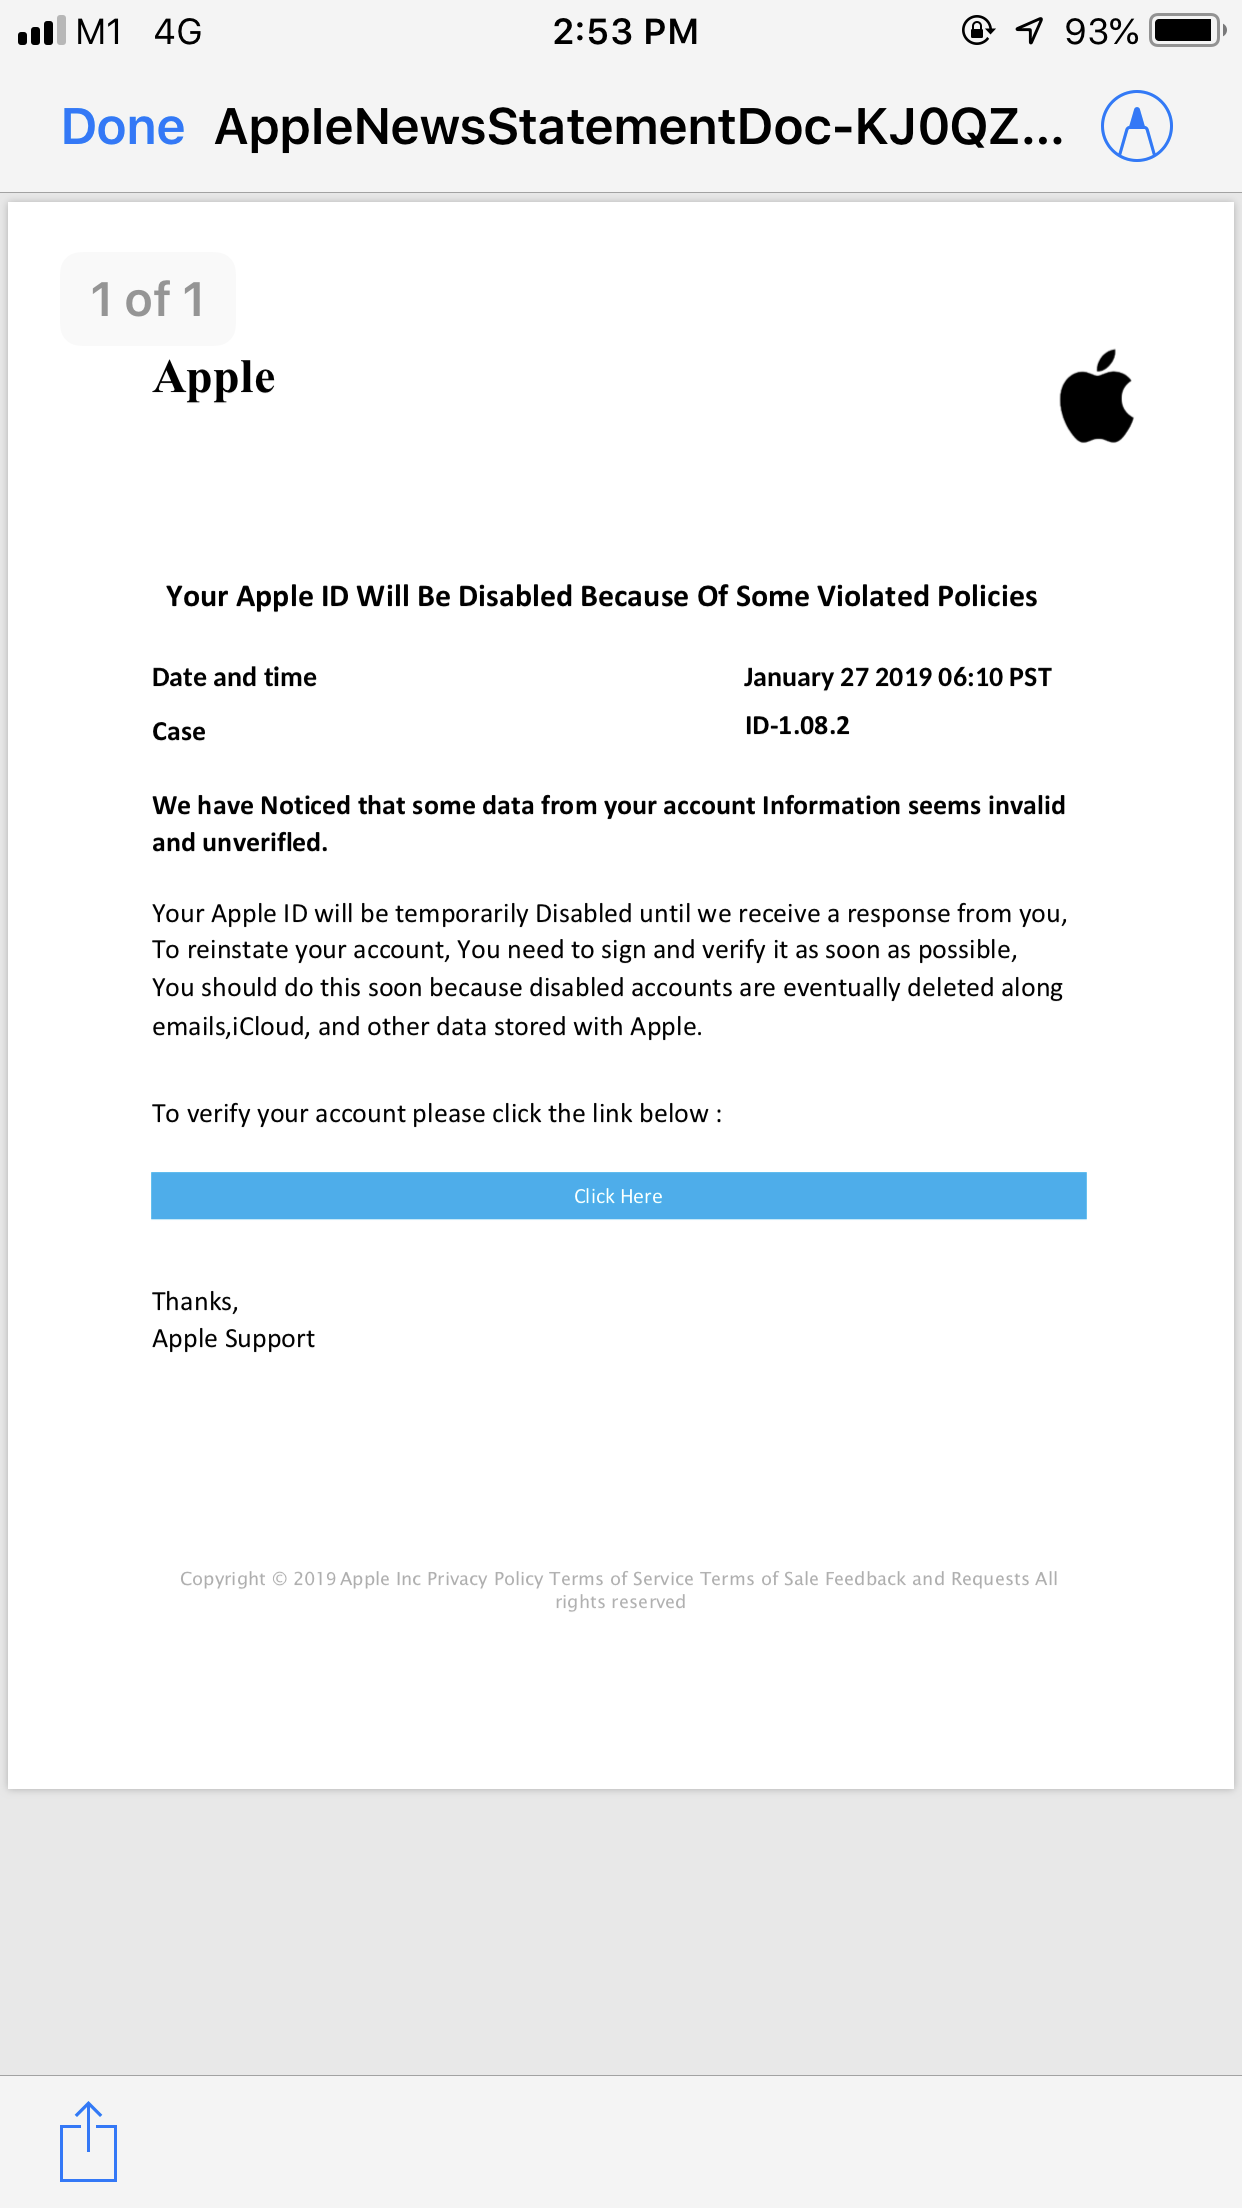 Does Apple Have an Email Service?